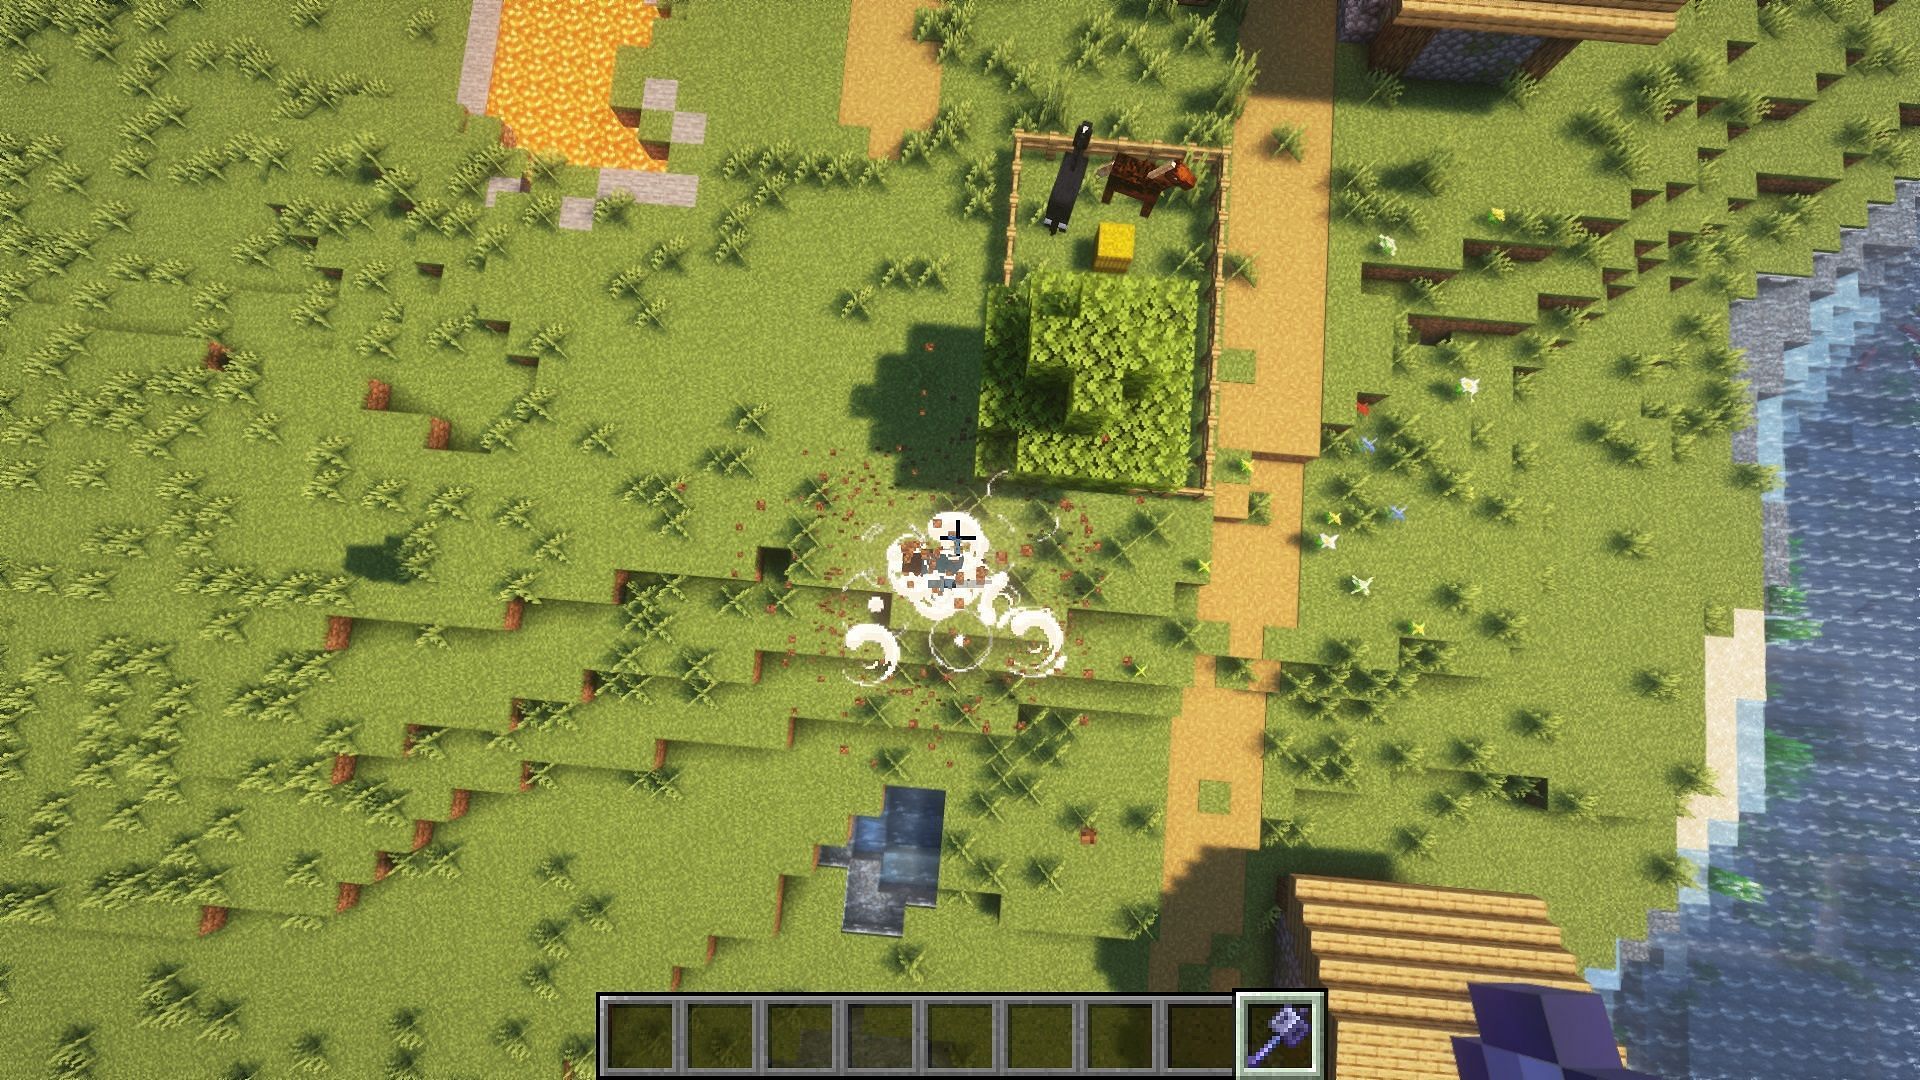 Players get launched upwards upon landing a successful smash attack with Wind Burst (Image via Mojang)